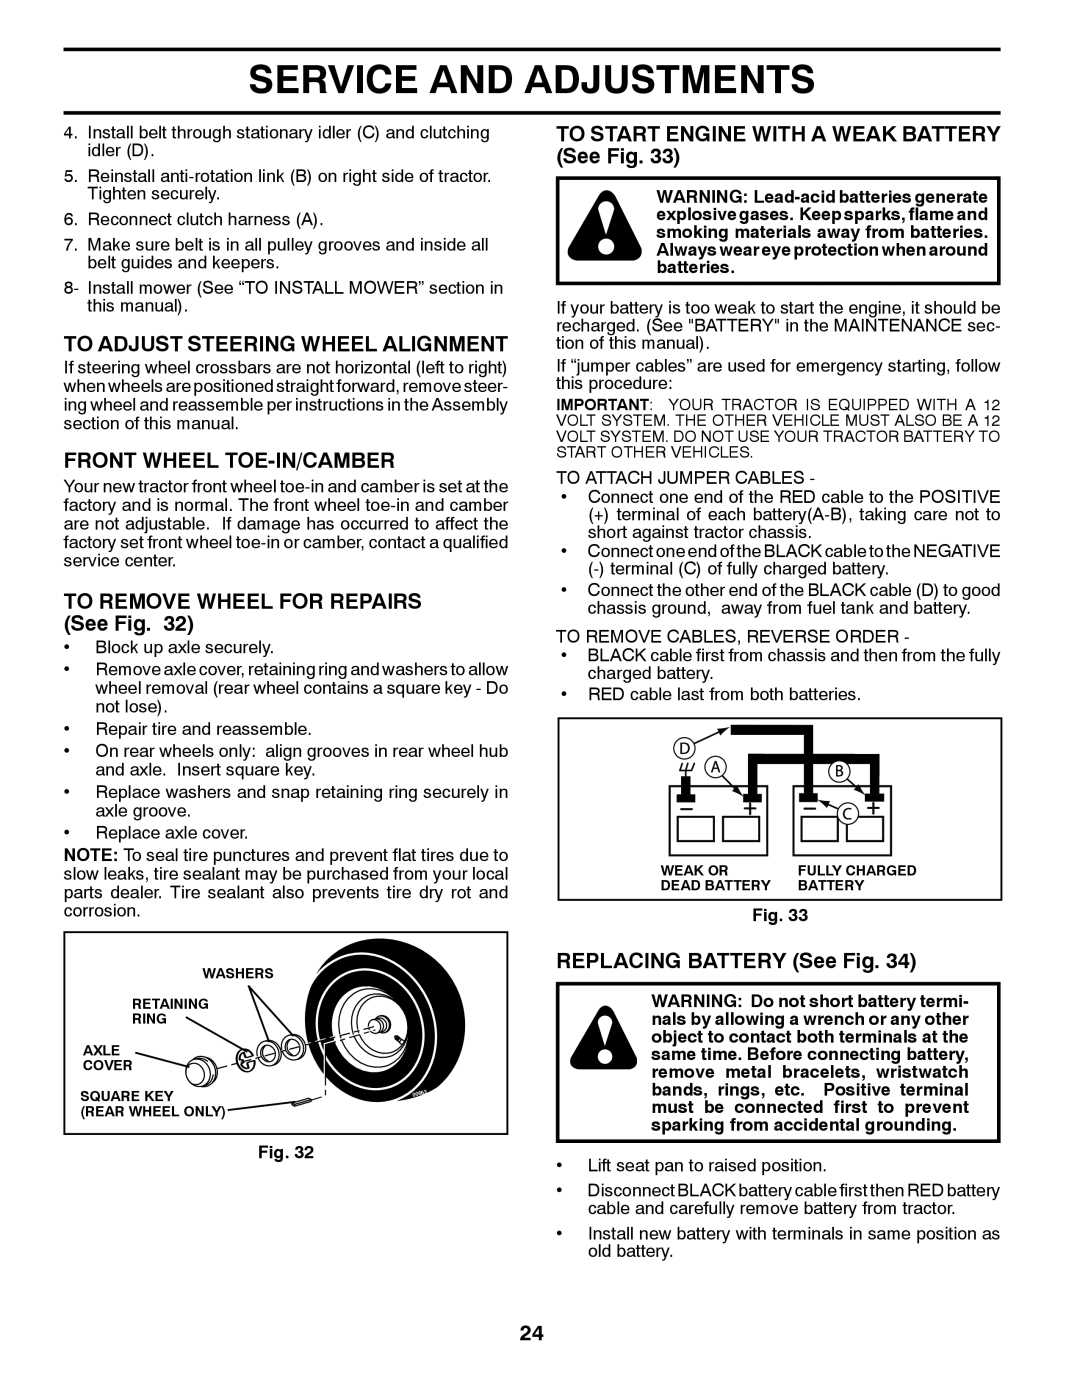 Jonsered LT2218A manual To Adjust Steering Wheel Alignment, Front Wheel Toe-In/Camber, TO REMOVE WHEEL FOR REPAIRS See Fig 